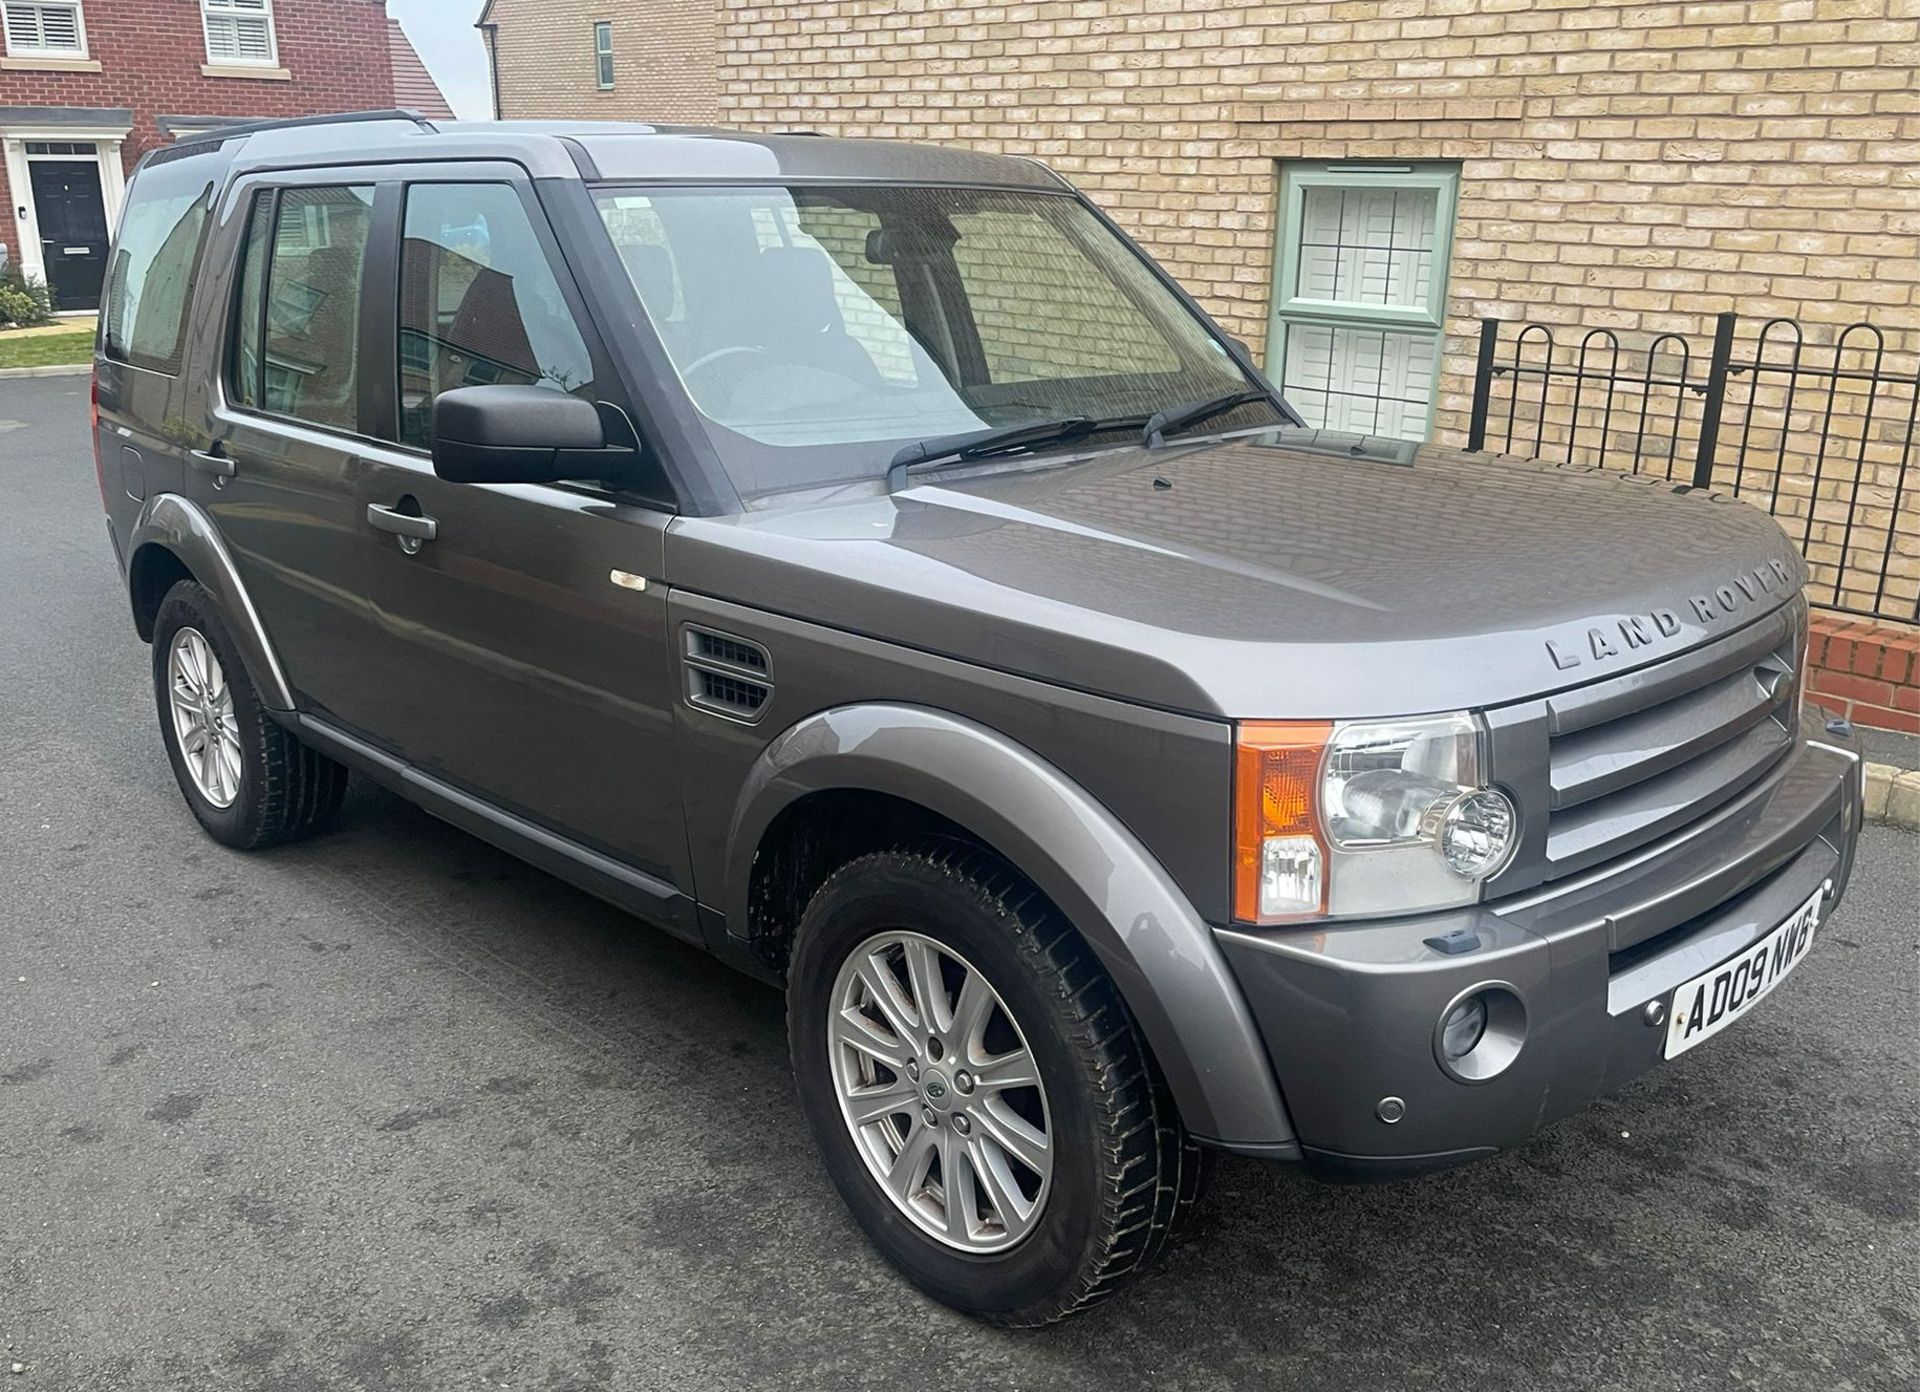 2009 Land Rover Discovery Tdv6 190 Auto Diesel SUV - Image 2 of 15